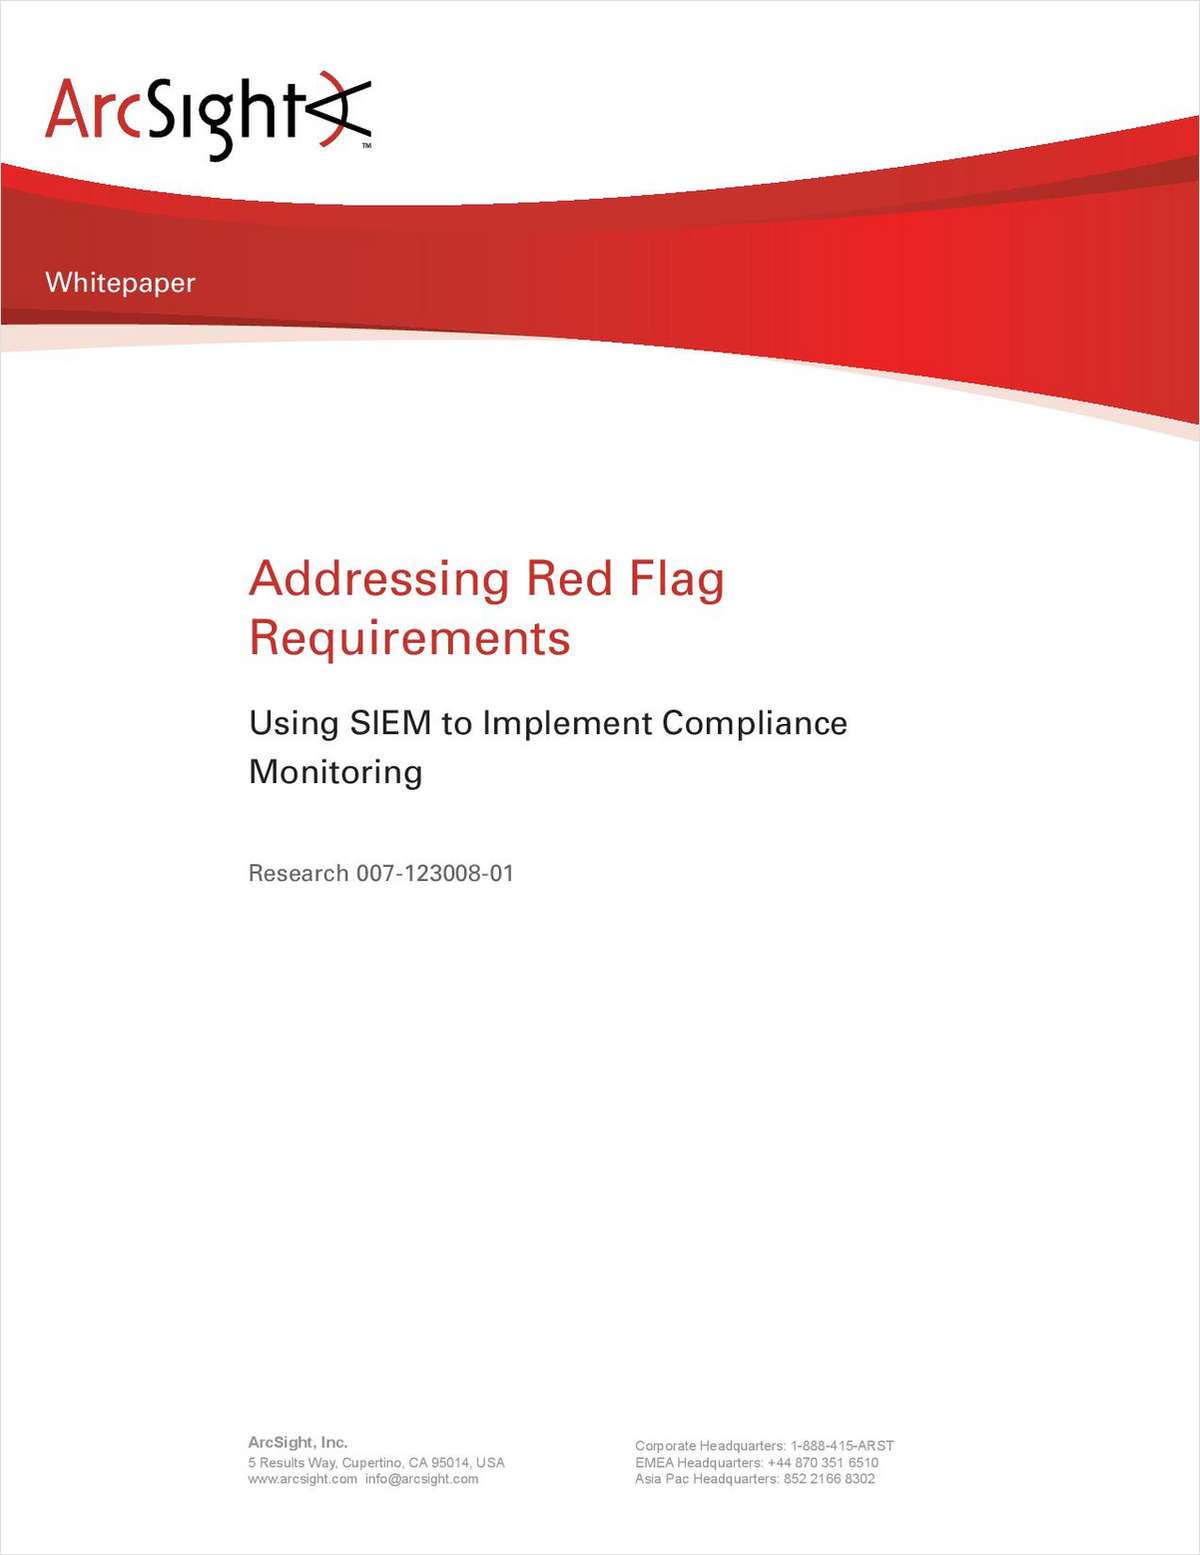 Addressing Red Flag Requirements